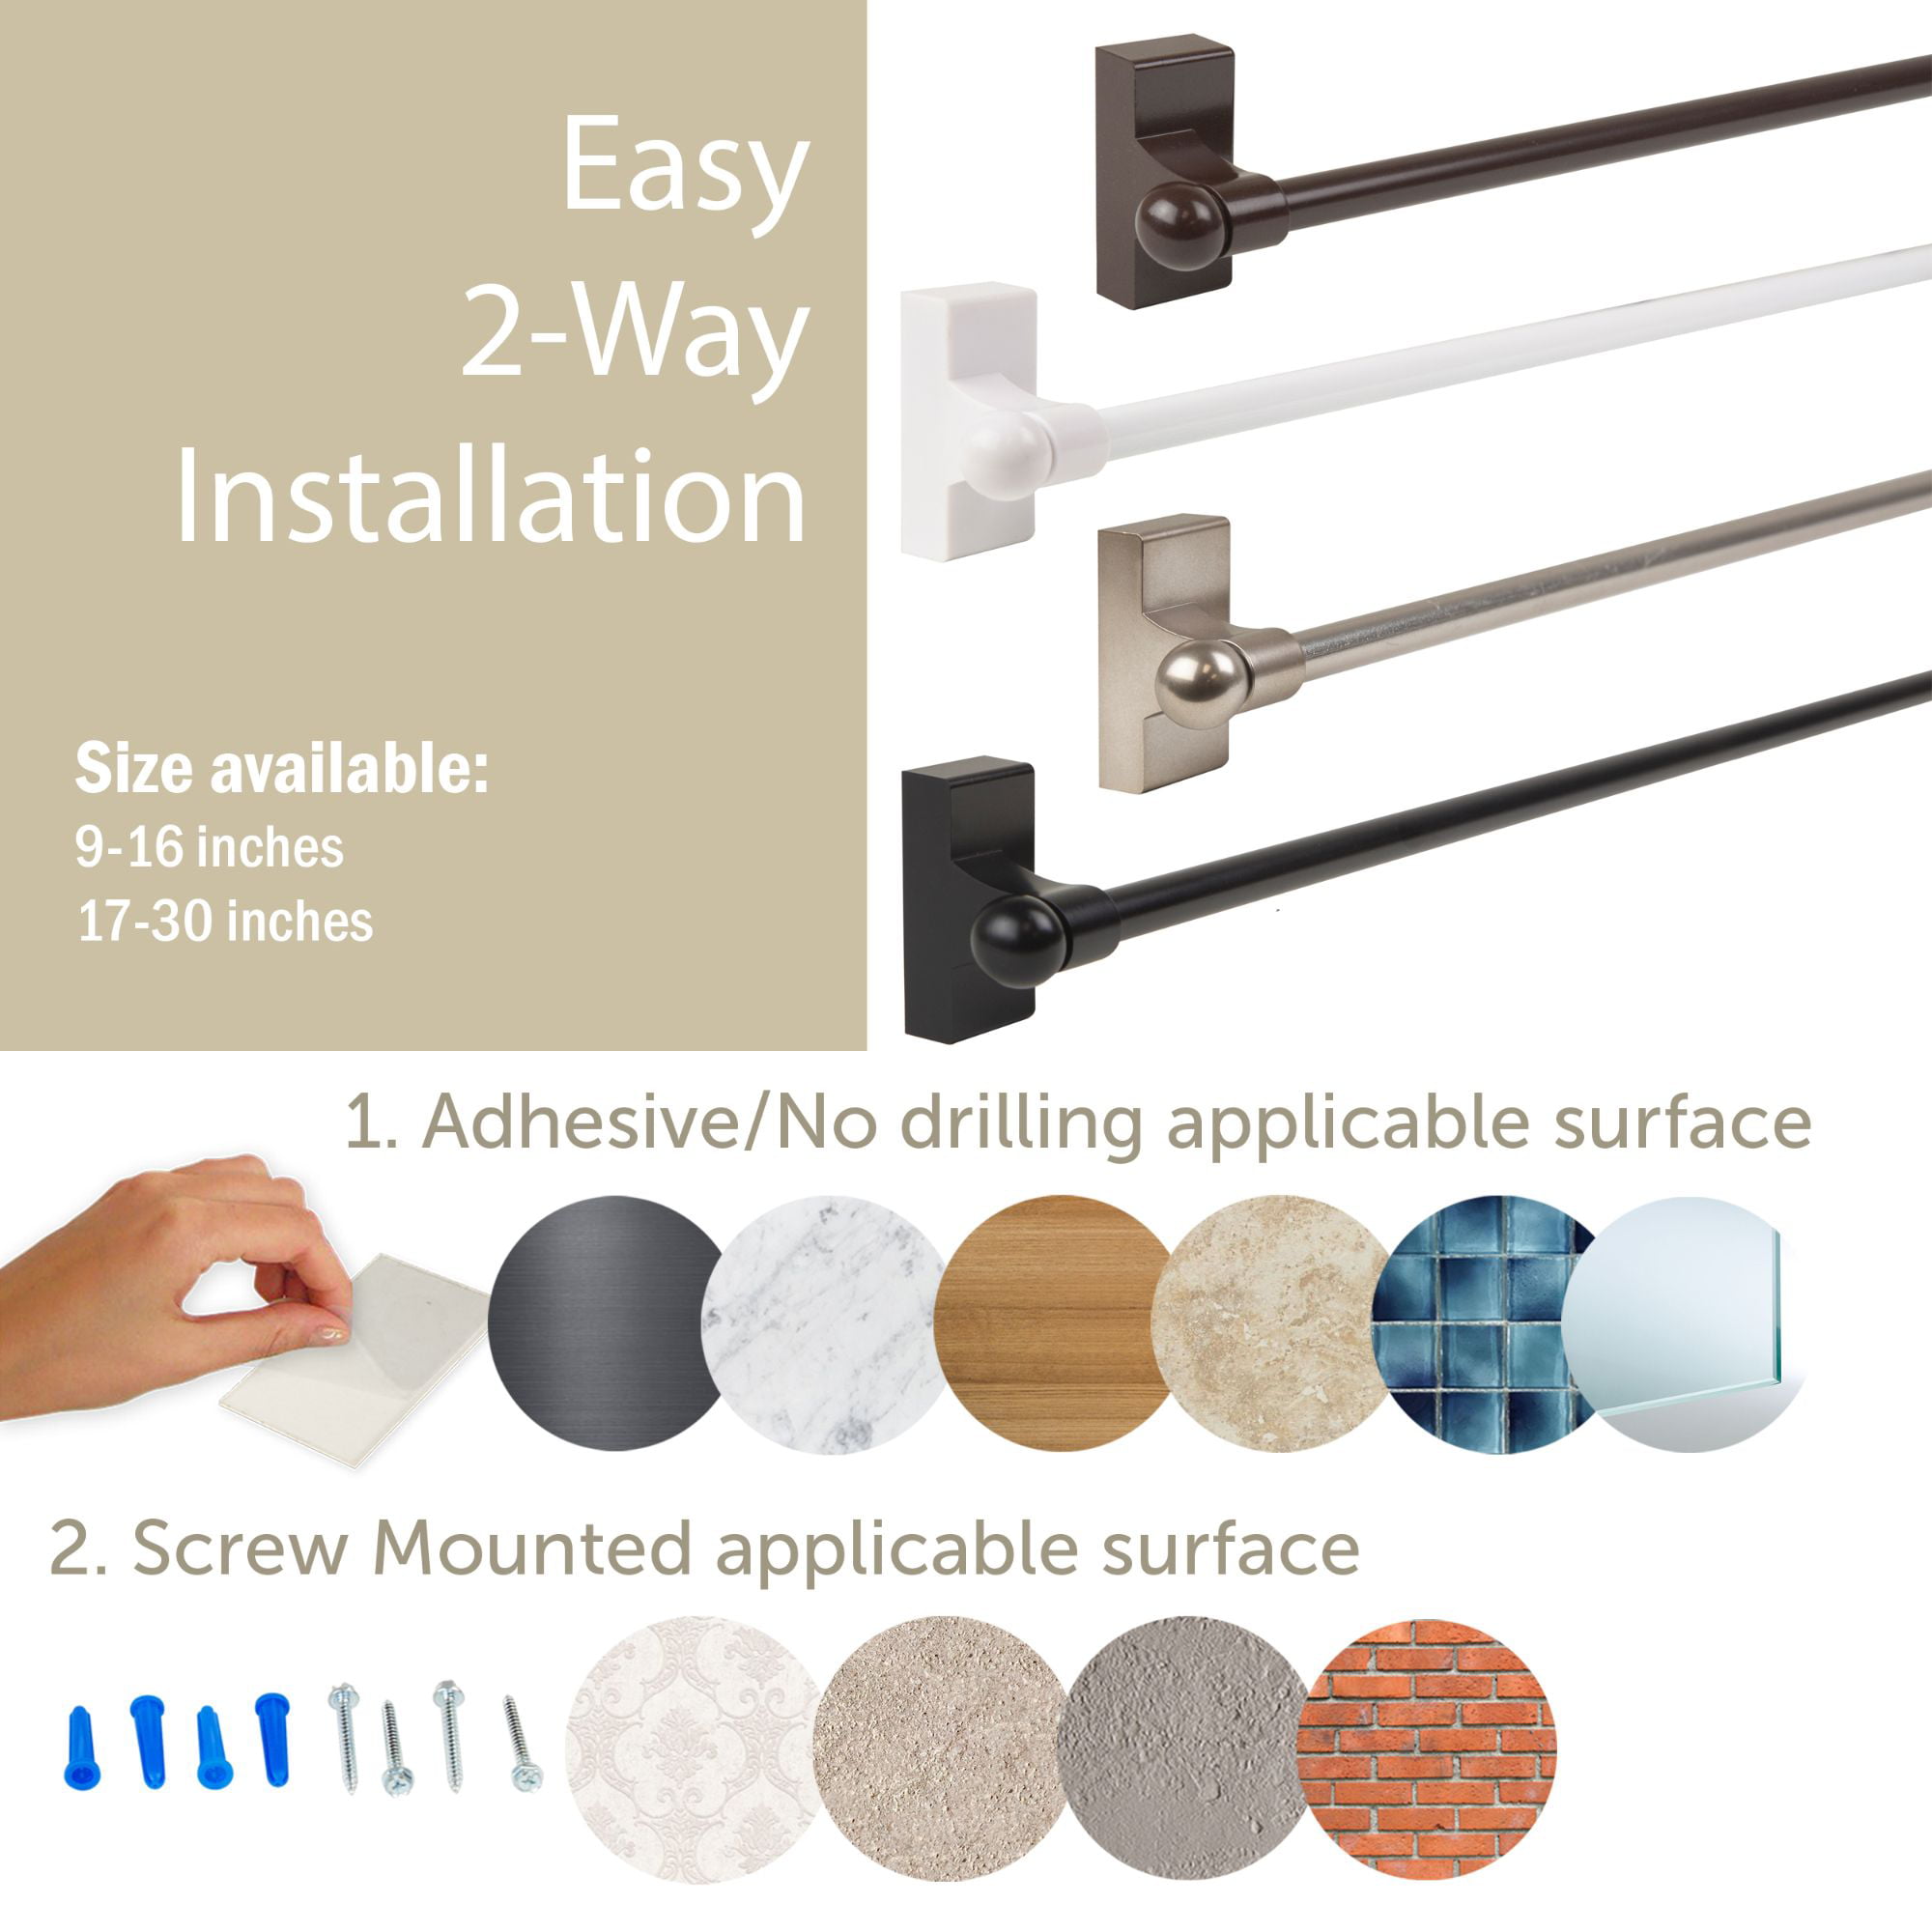 Self-adhesive/Wall Mount Rod 17-30 inches 